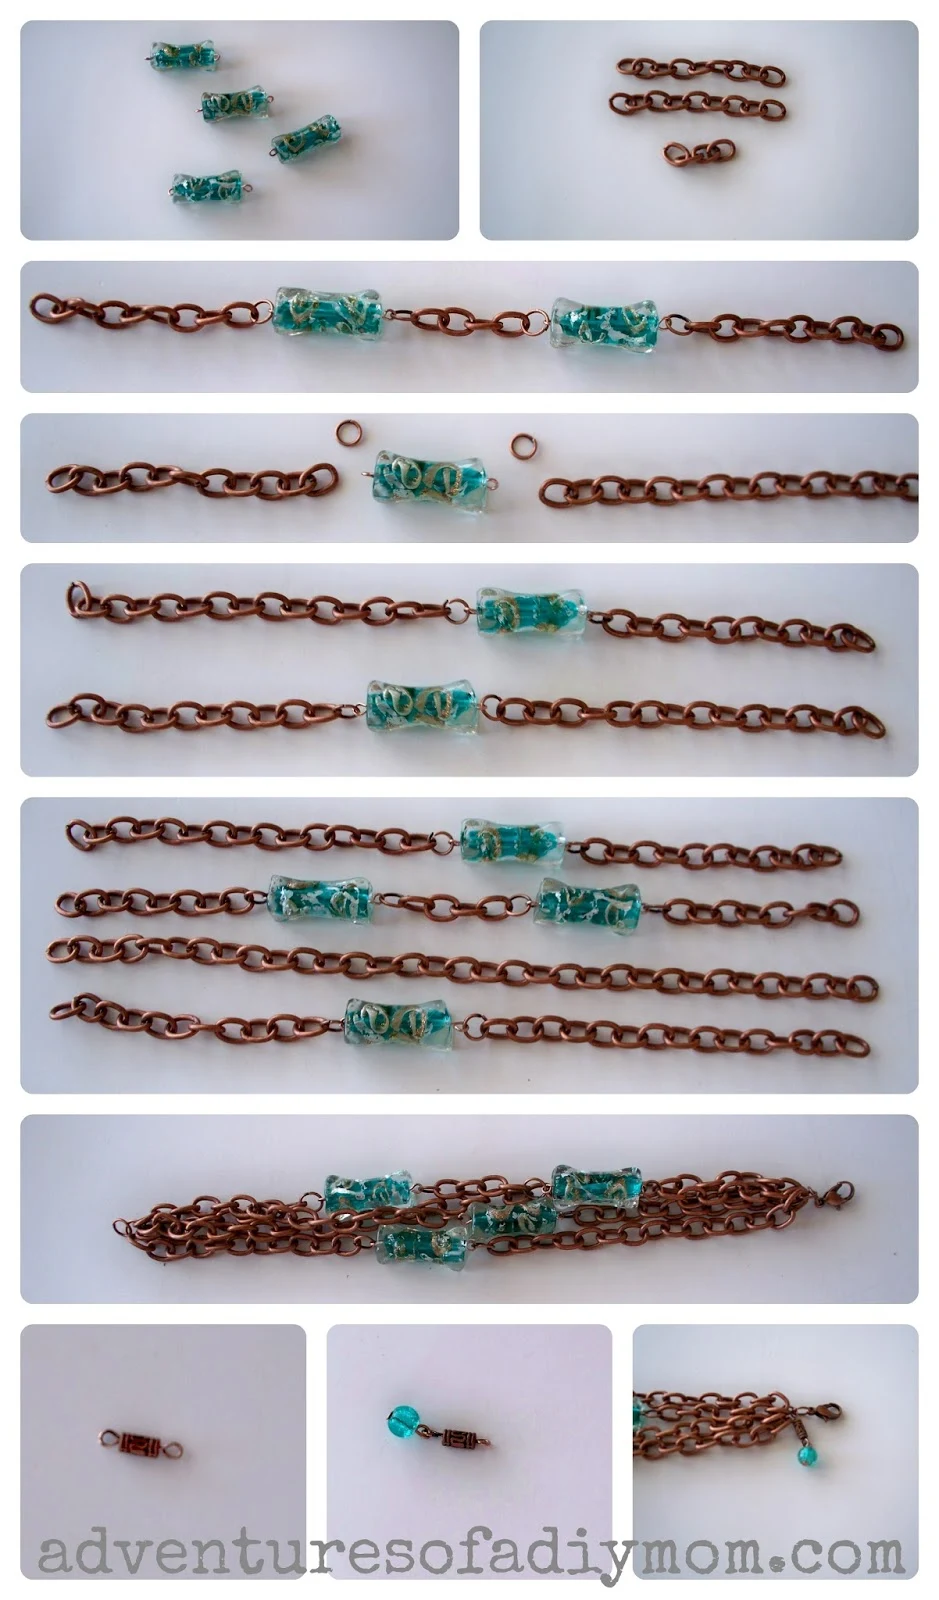 How to Make a Turquoise and Copper Bracelet